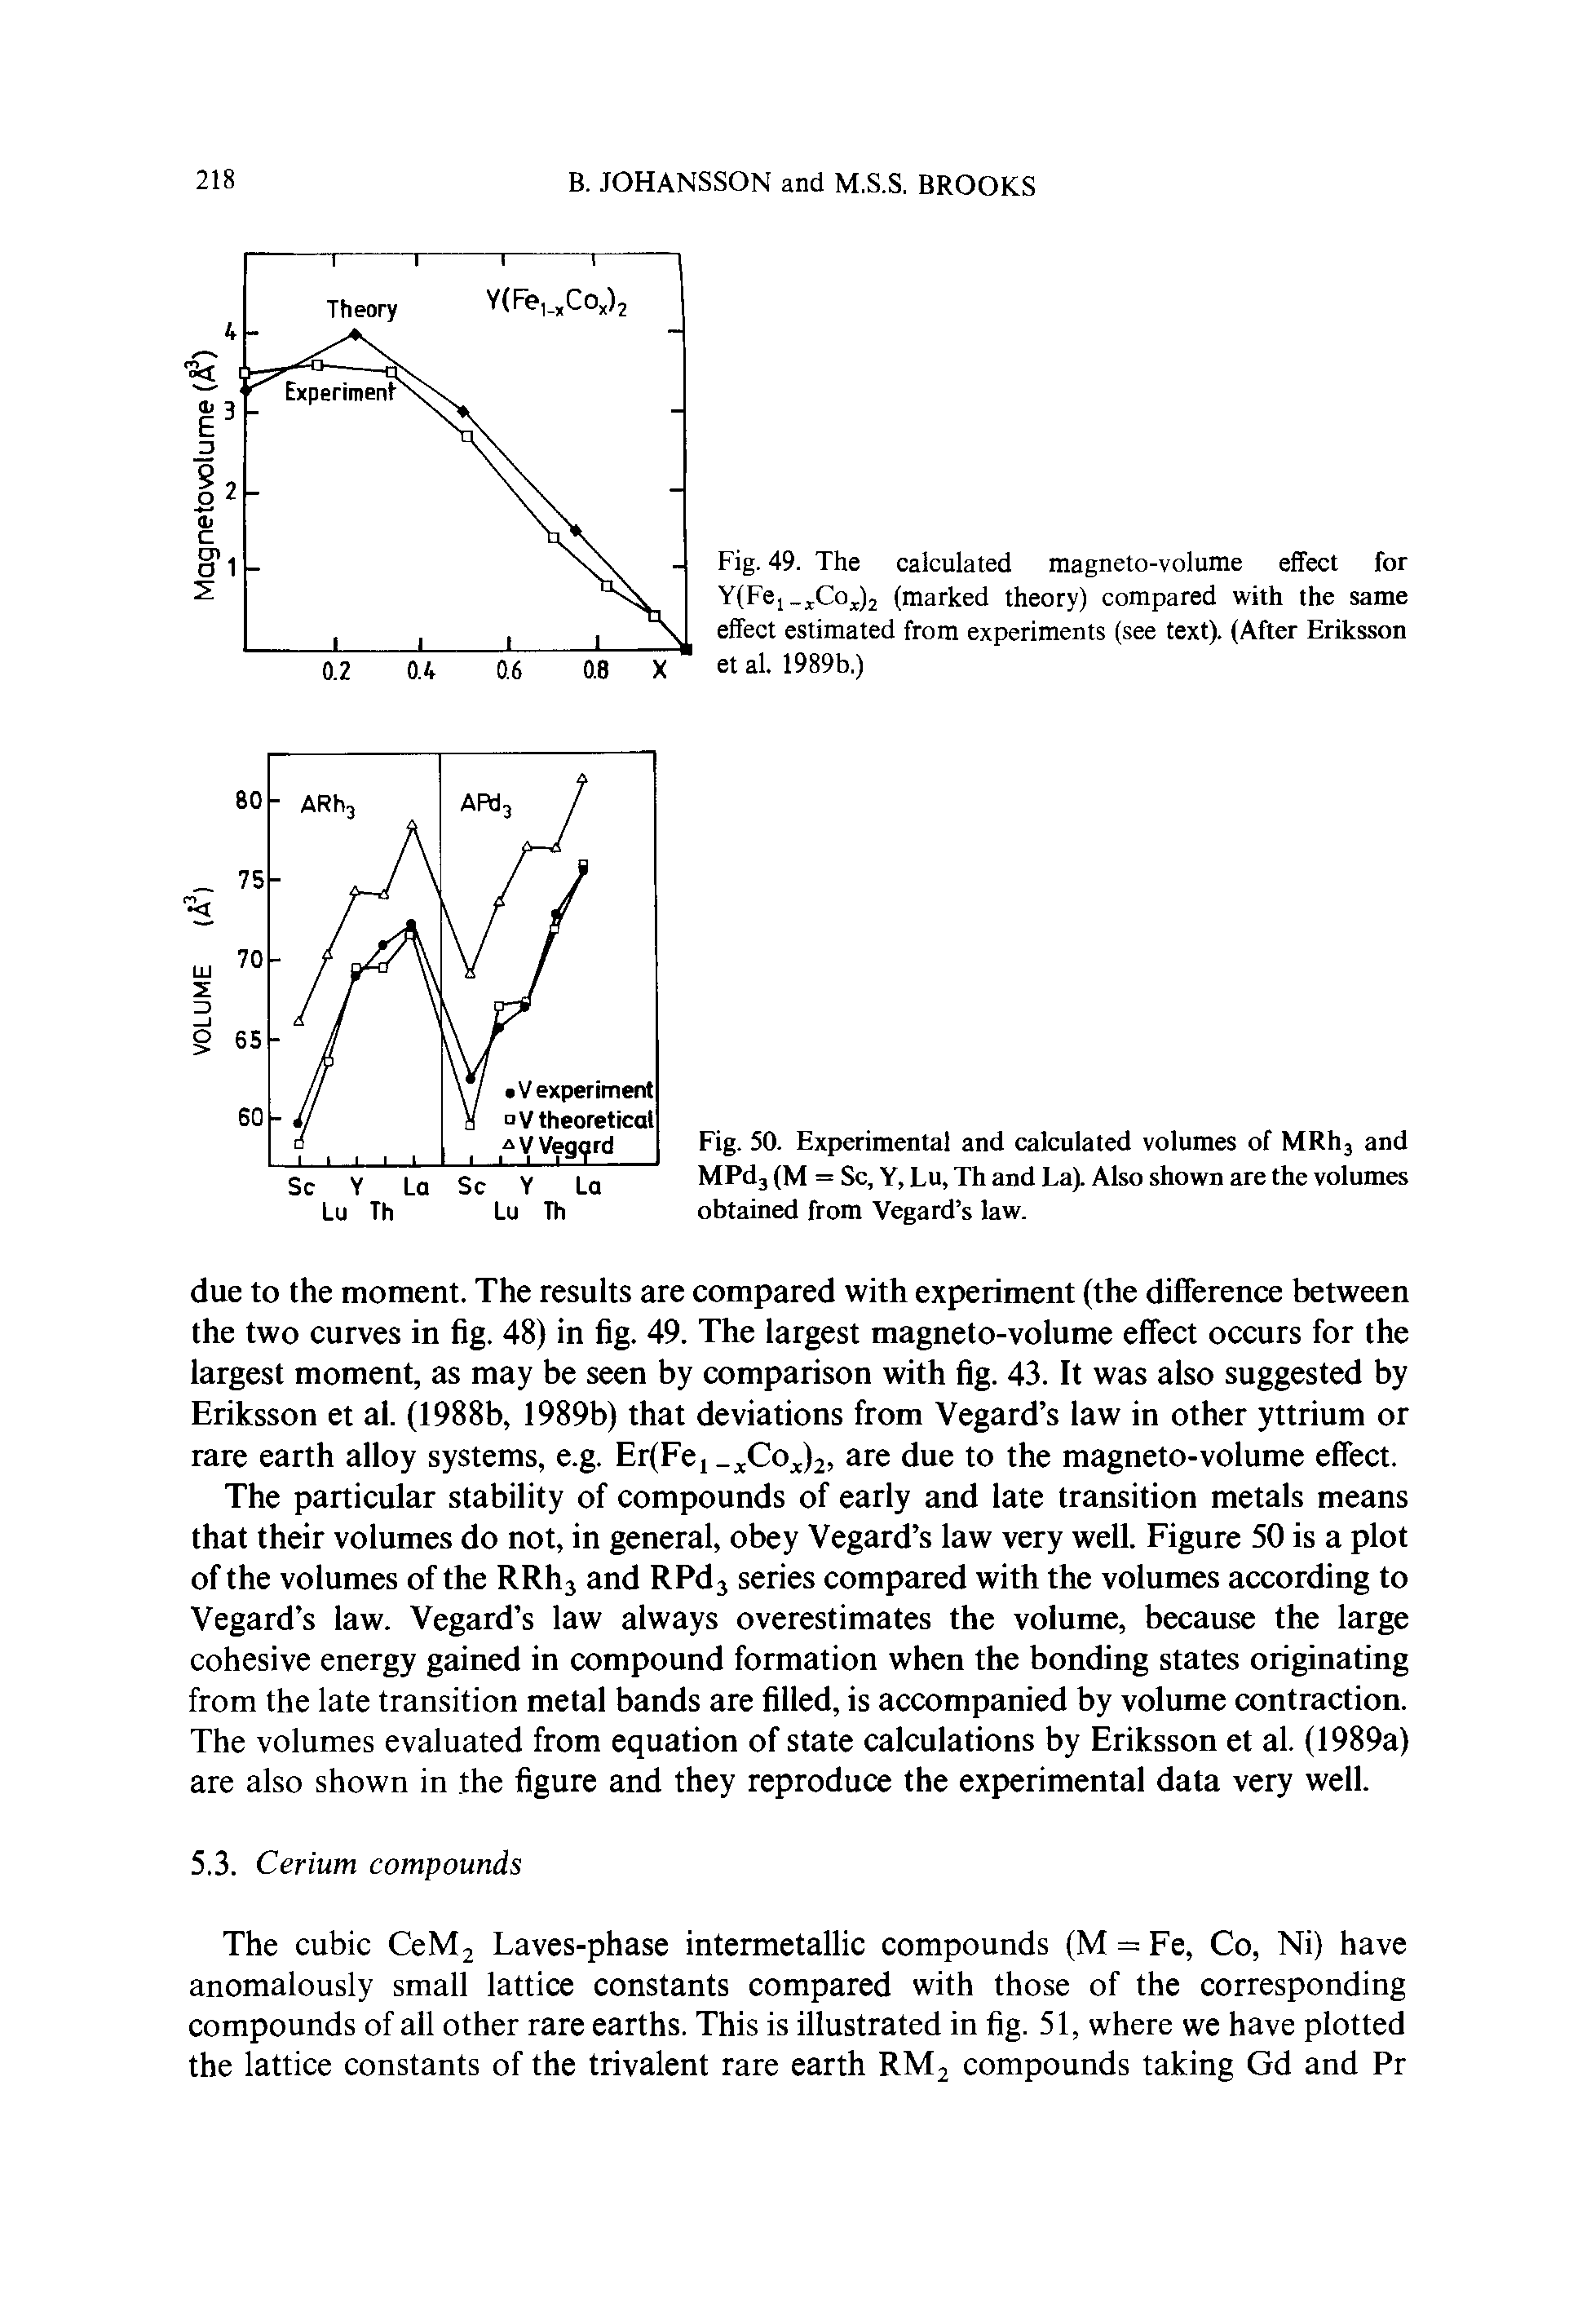 Fig. 49. The calculated magneto-volume effect for Y(Fei Coj2 (marked theory) compared with the same effect estimated from experiments (see text). (After Eriksson et al. 1989b.)...